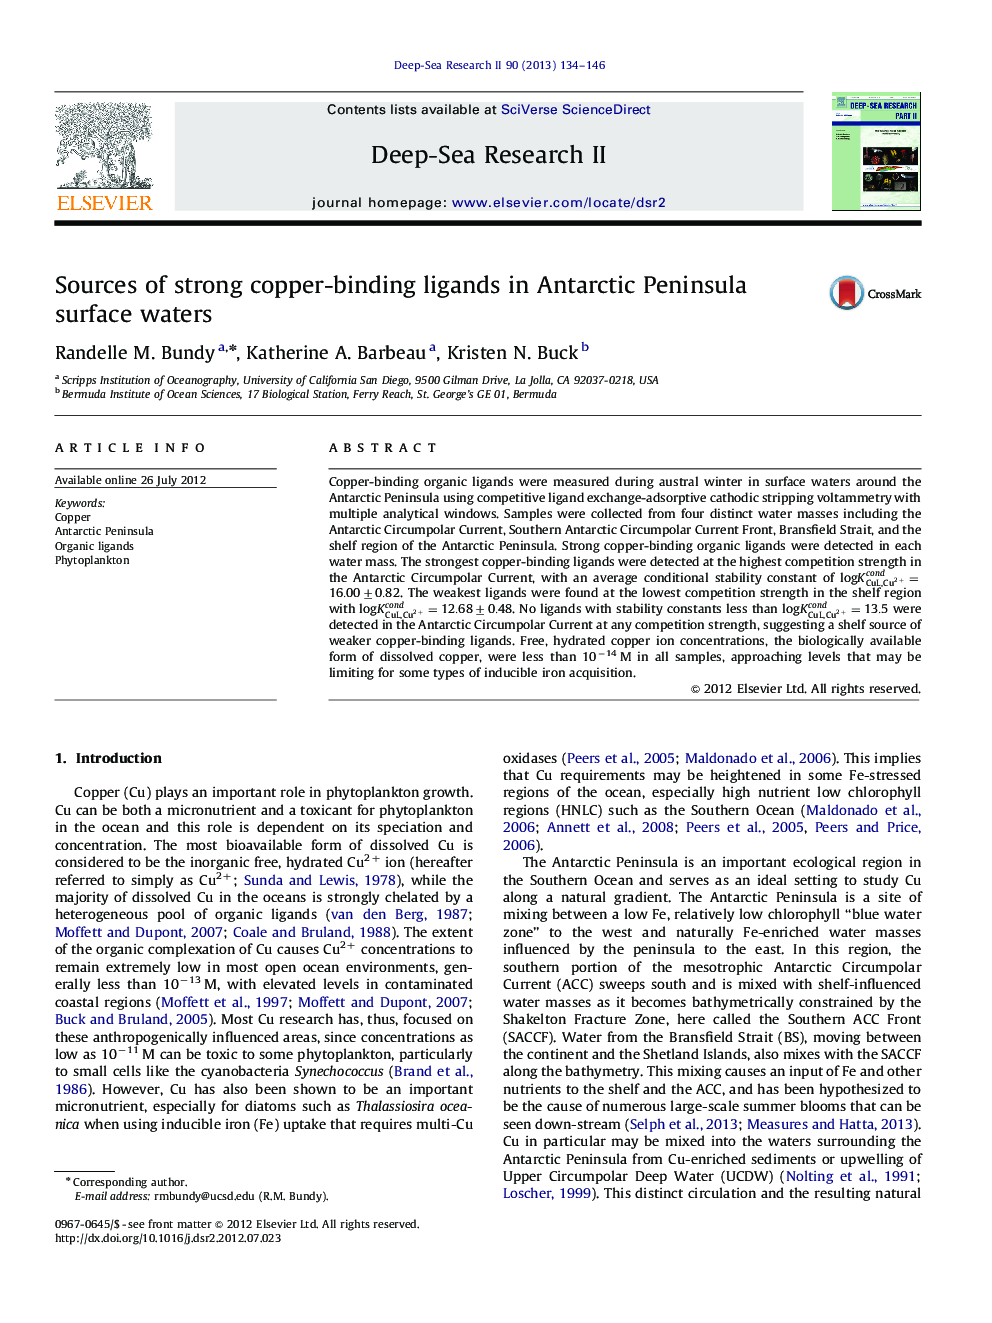 Sources of strong copper-binding ligands in Antarctic Peninsula surface waters